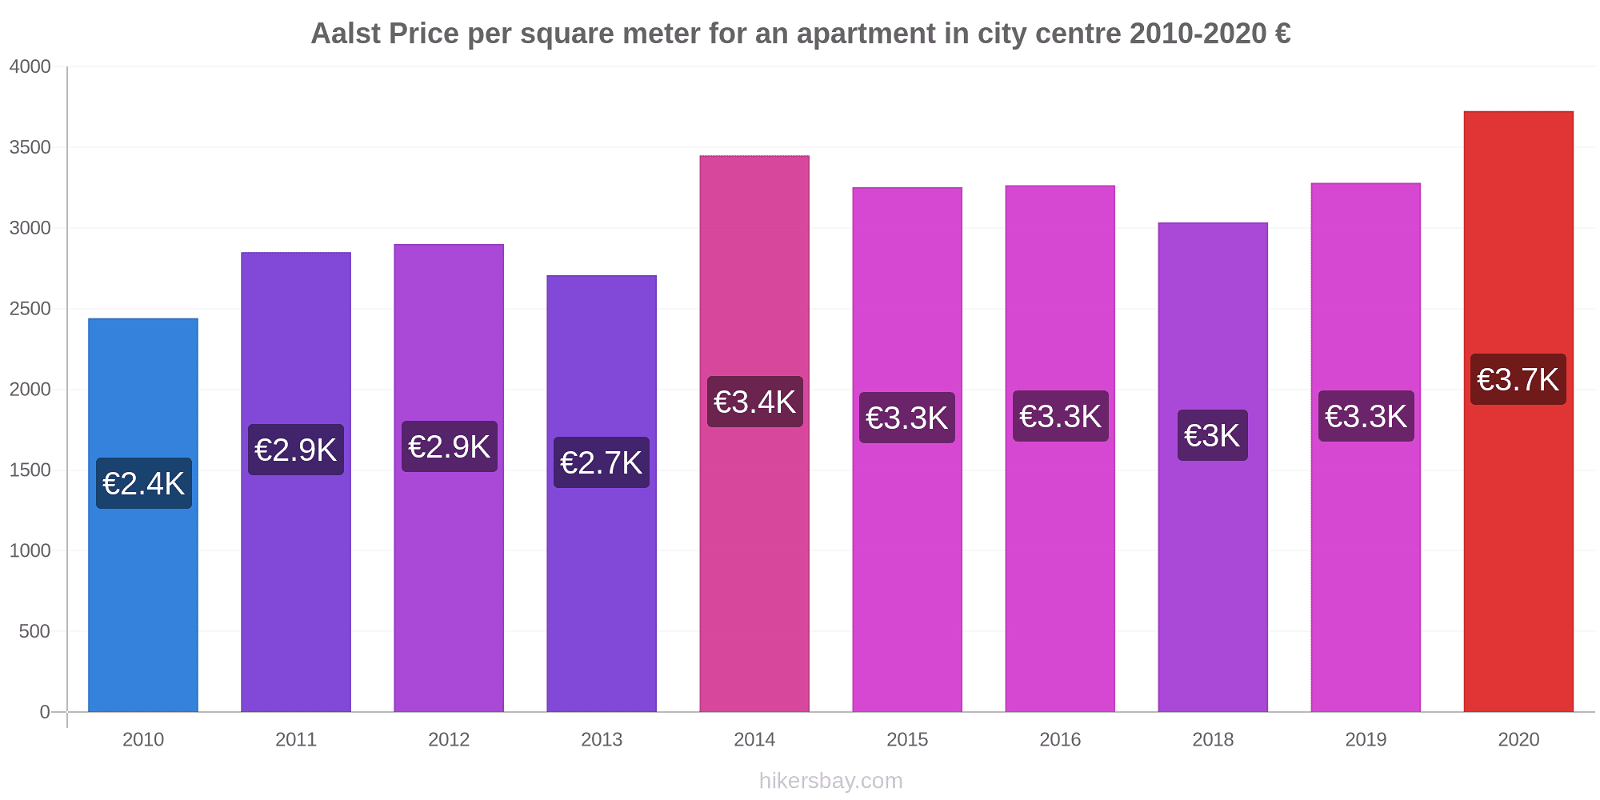 Aalst price changes Price per square meter for an apartment in city centre hikersbay.com